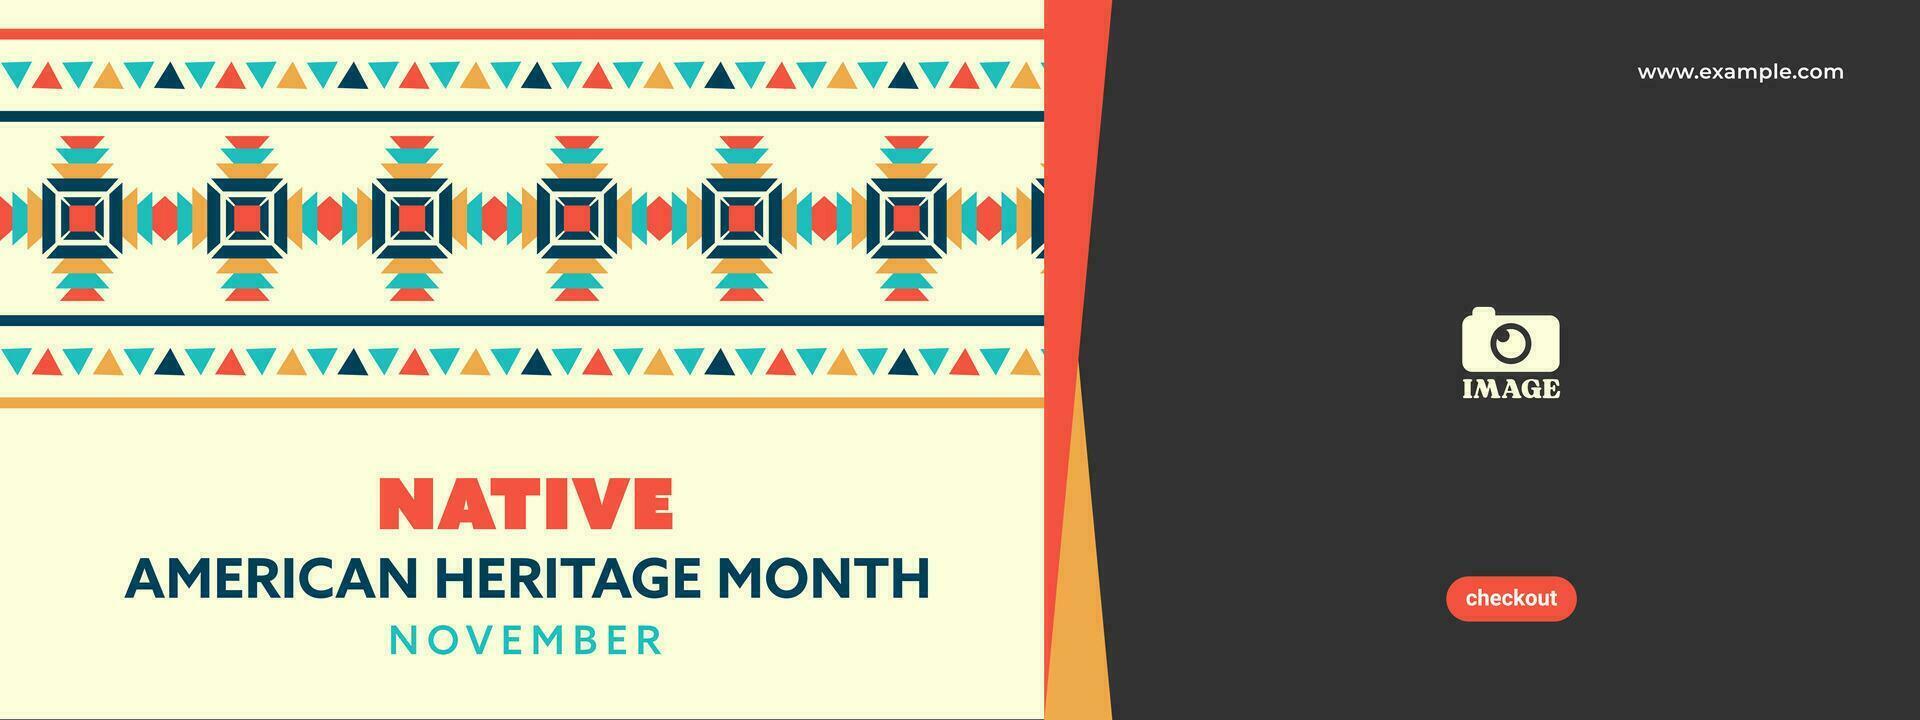 Native American Heritage Month. pattern design for greetings, backgrounds, banners, posters. vector